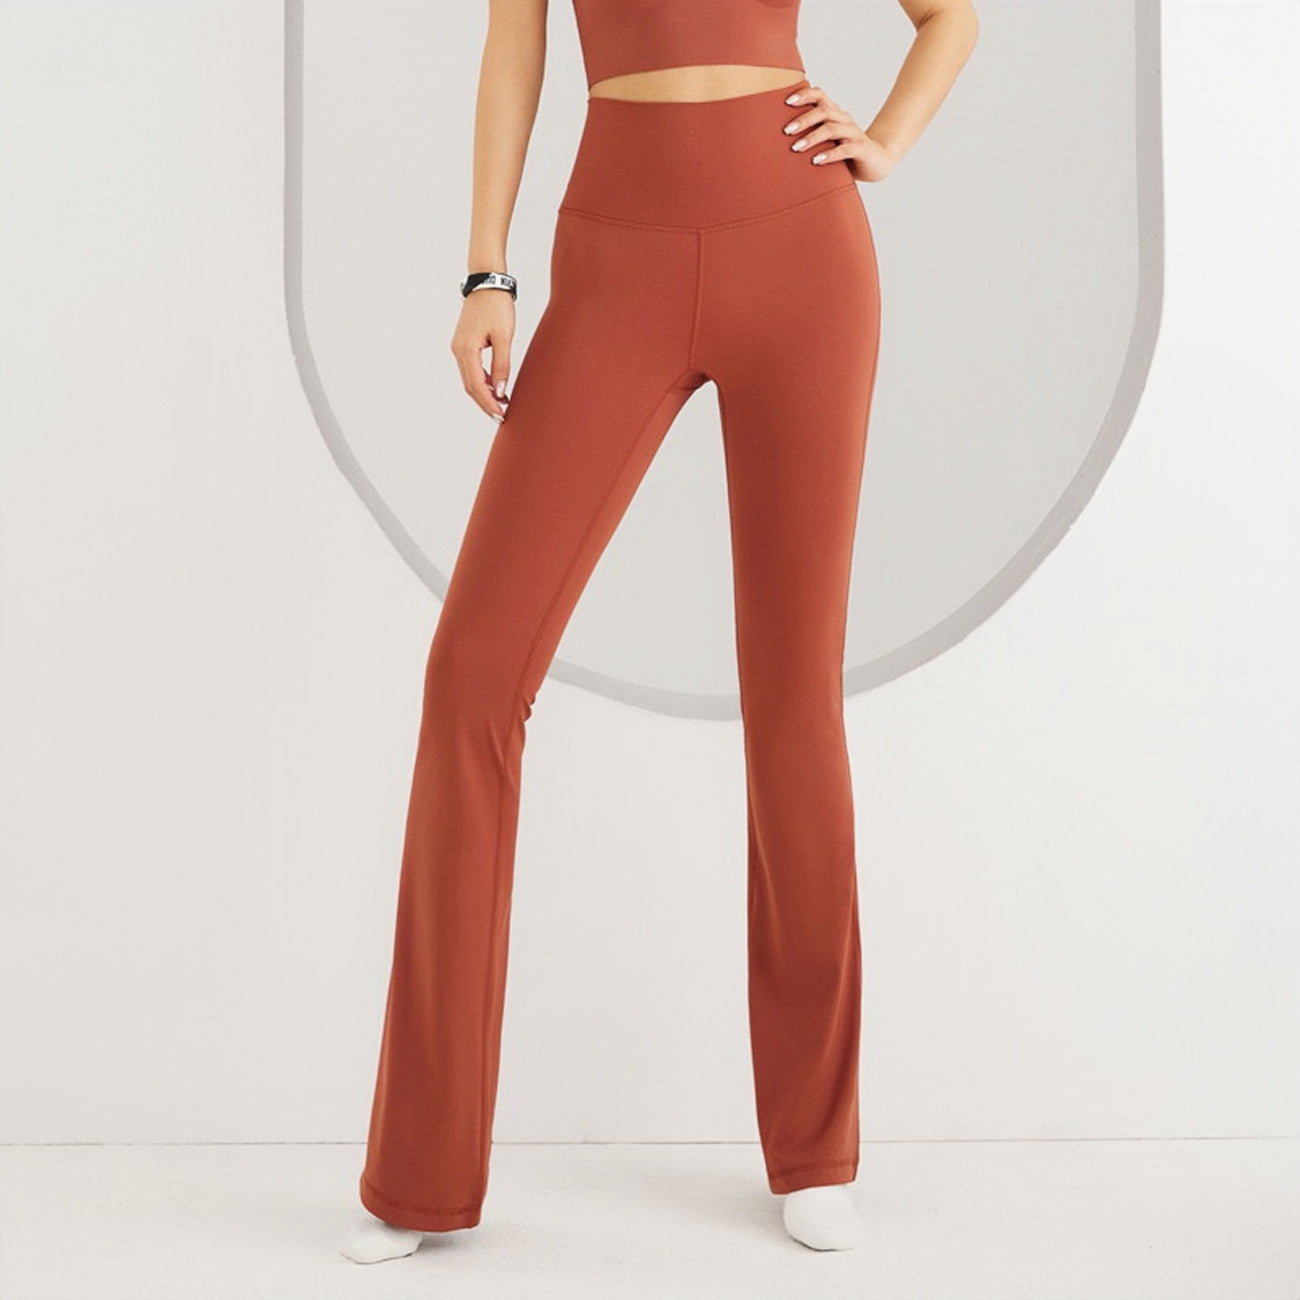 Gorgeous high-waisted, hip-lifting bell-bottom pants with exquisite temperament